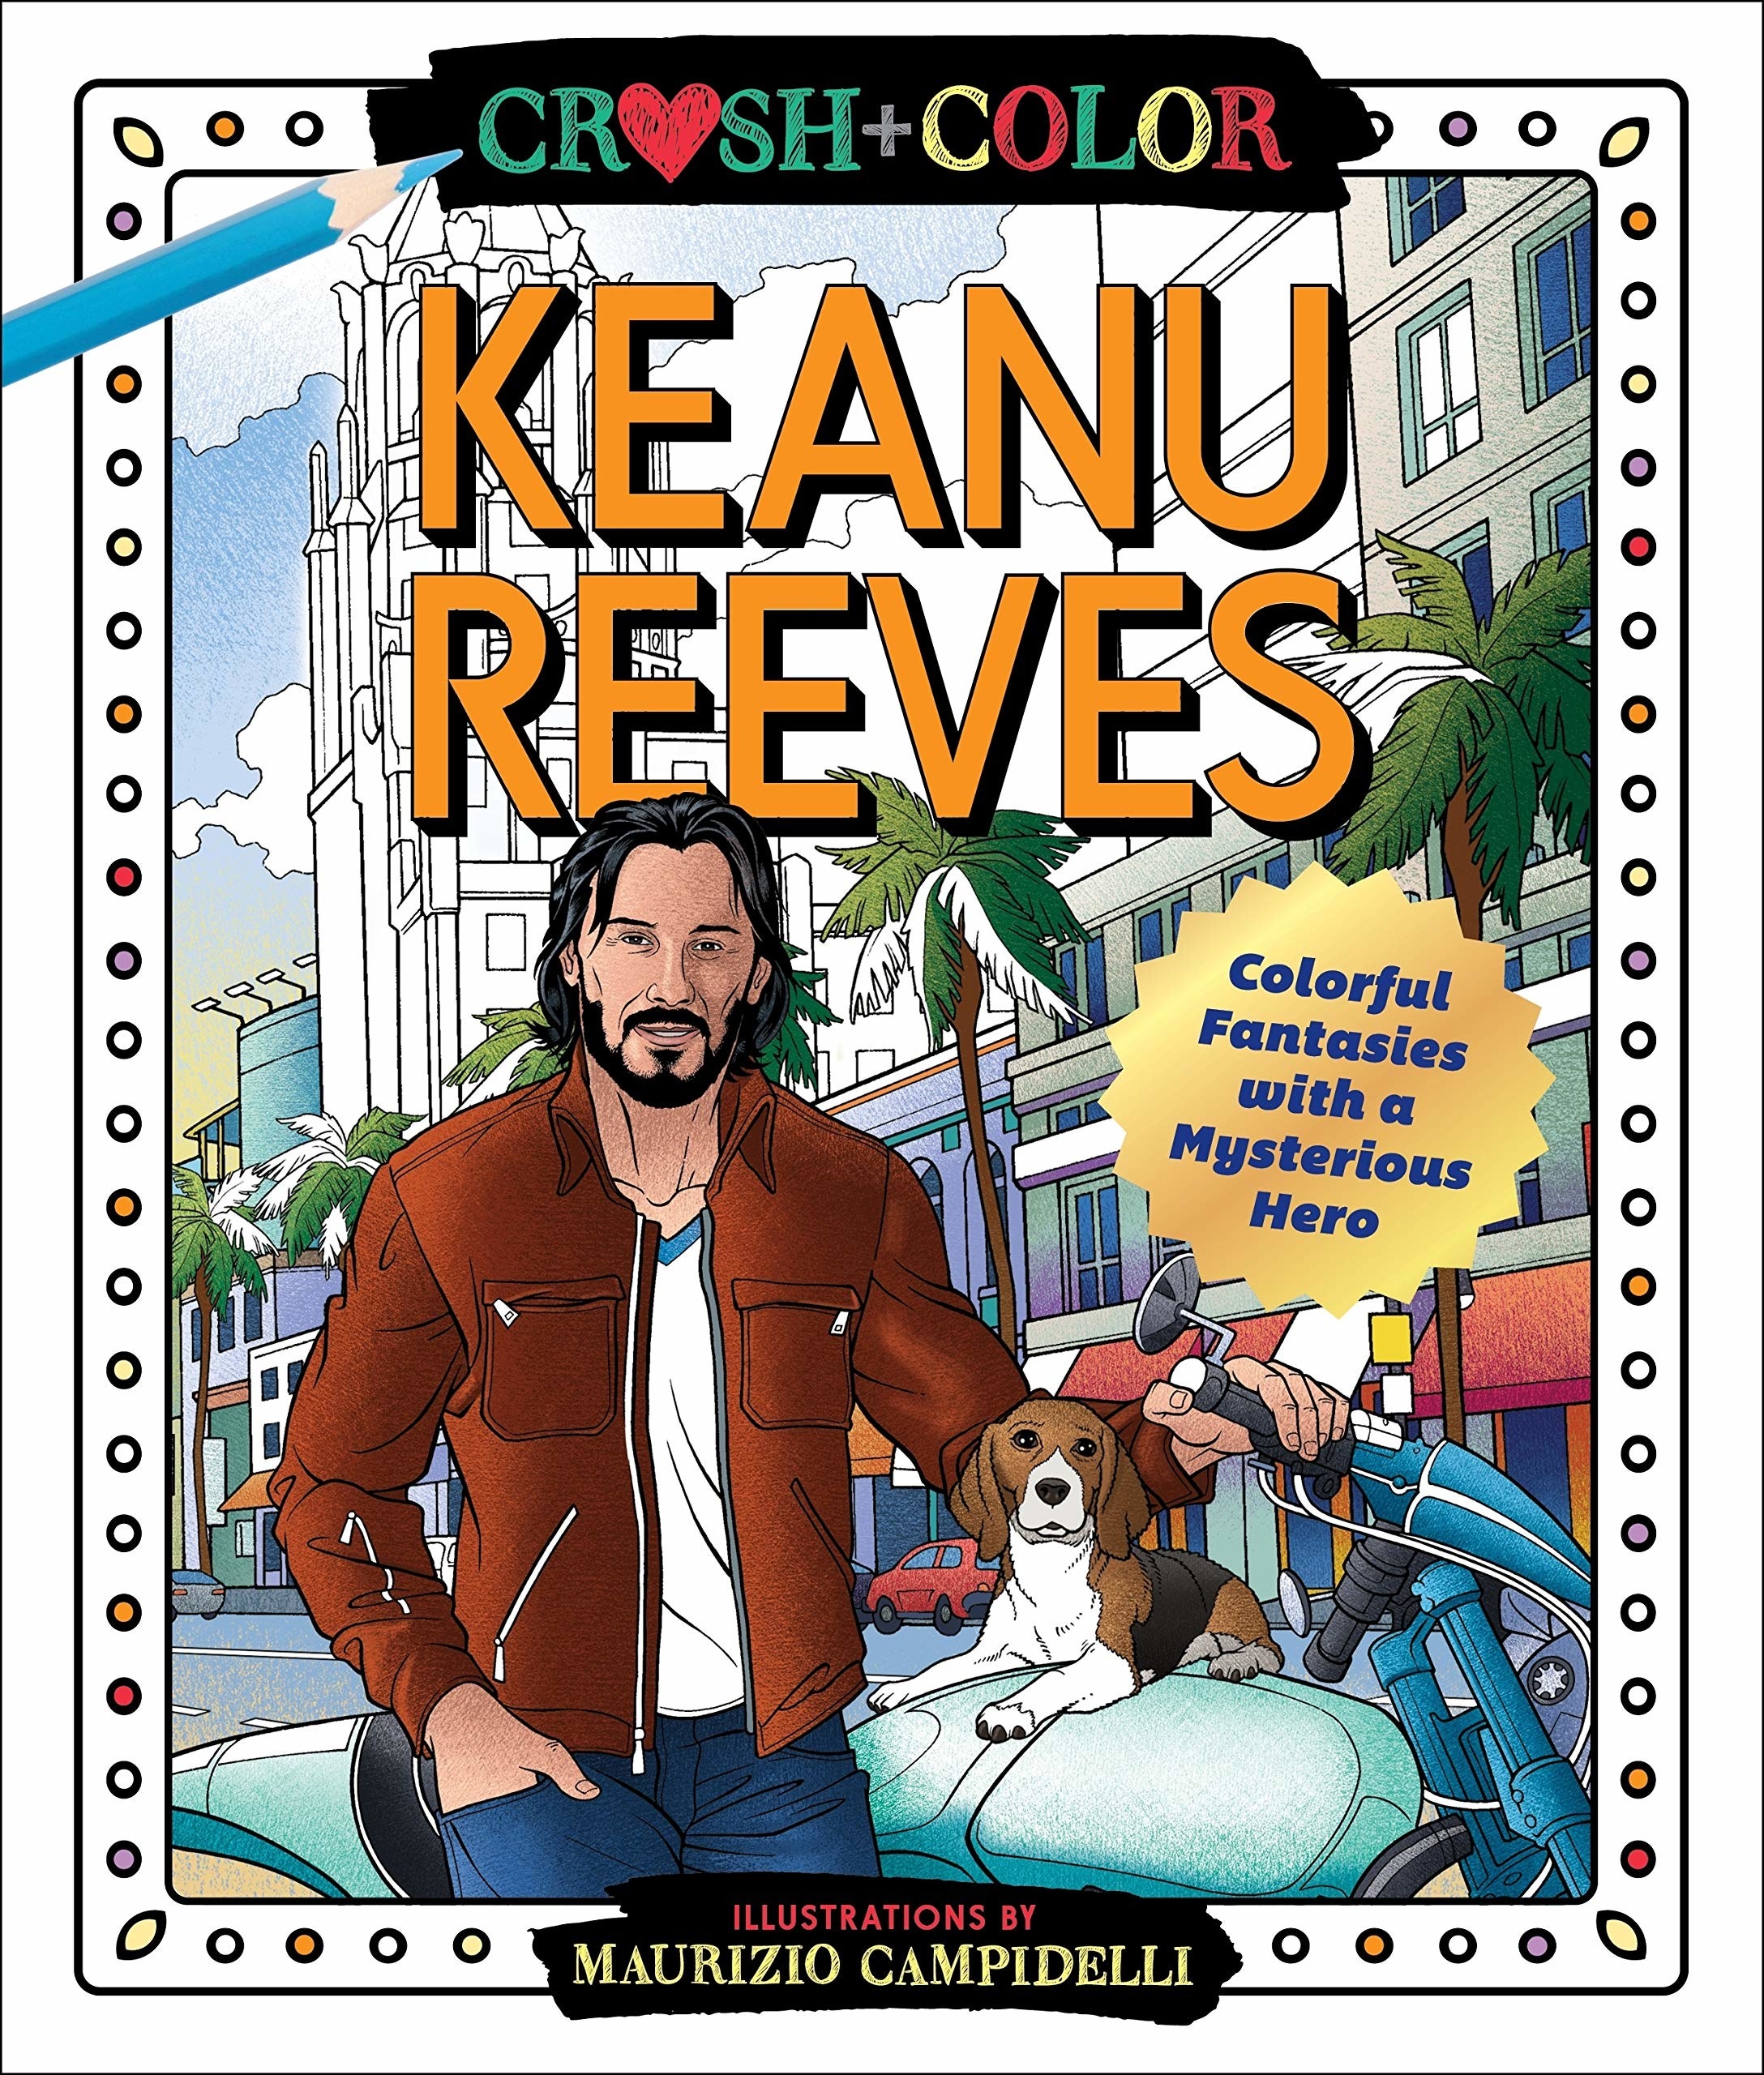 The front cover of a Keanu Reeves colouring book